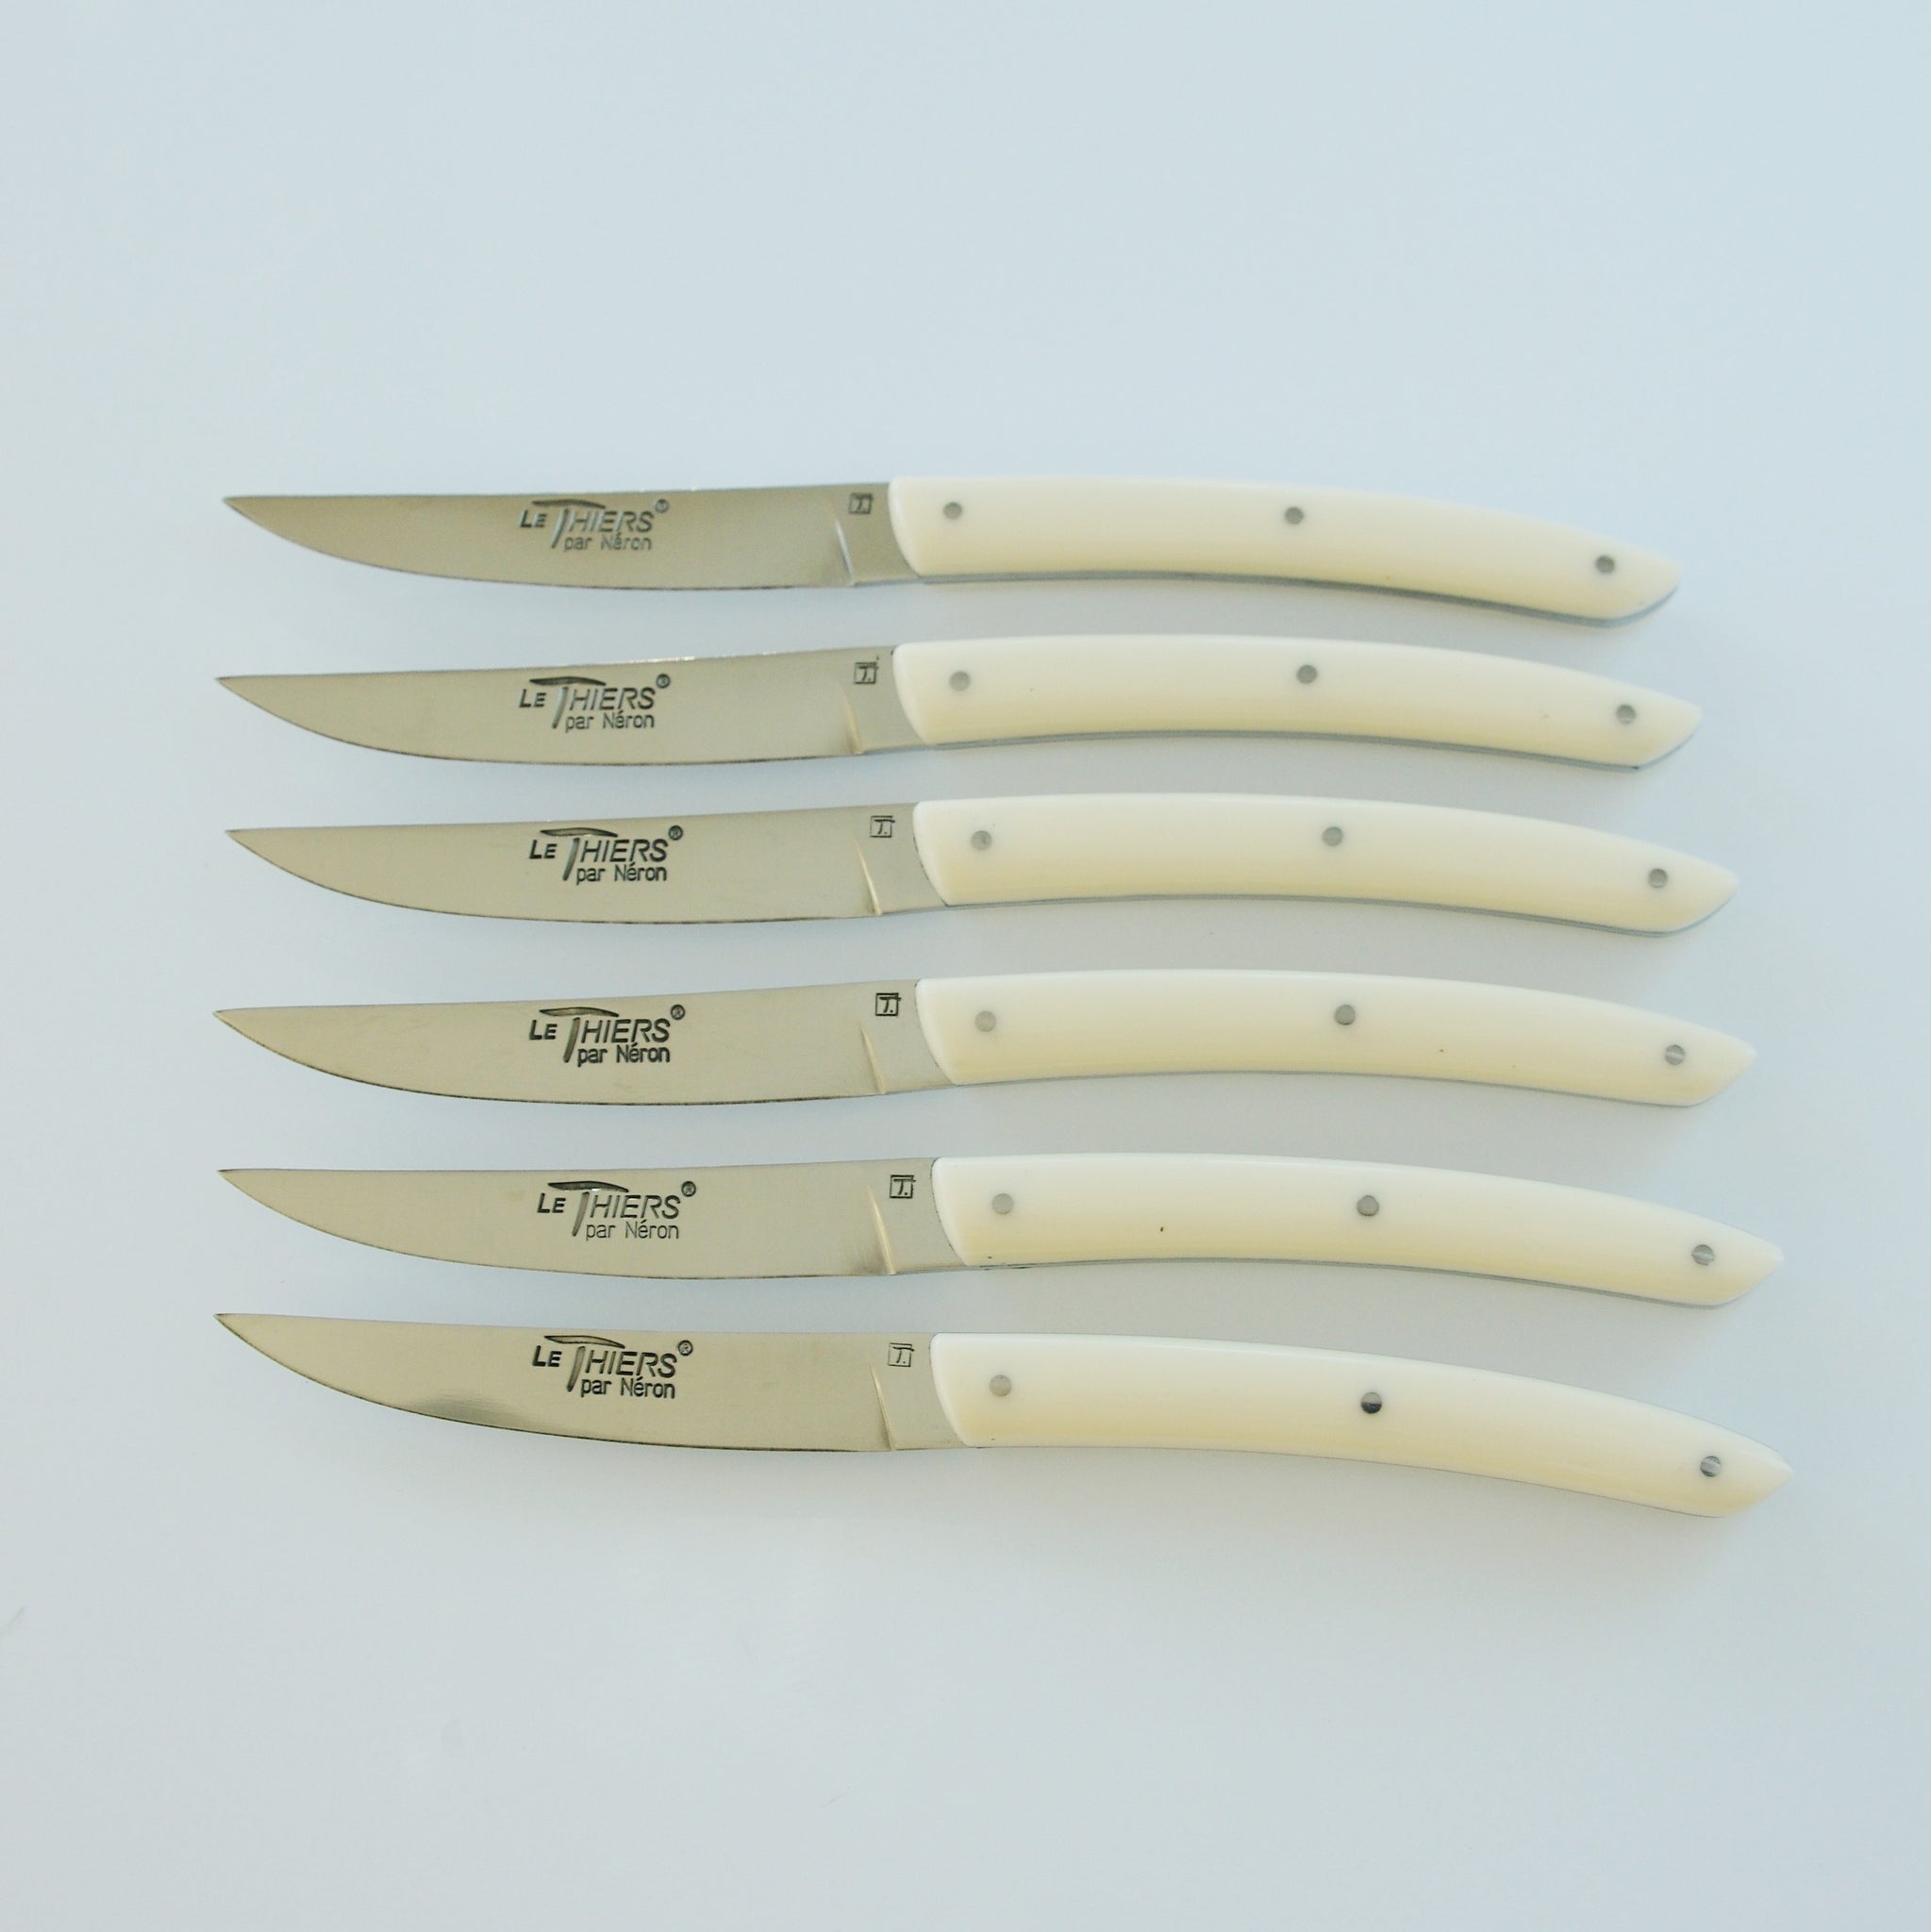 Row of six knives with cream colored handles.